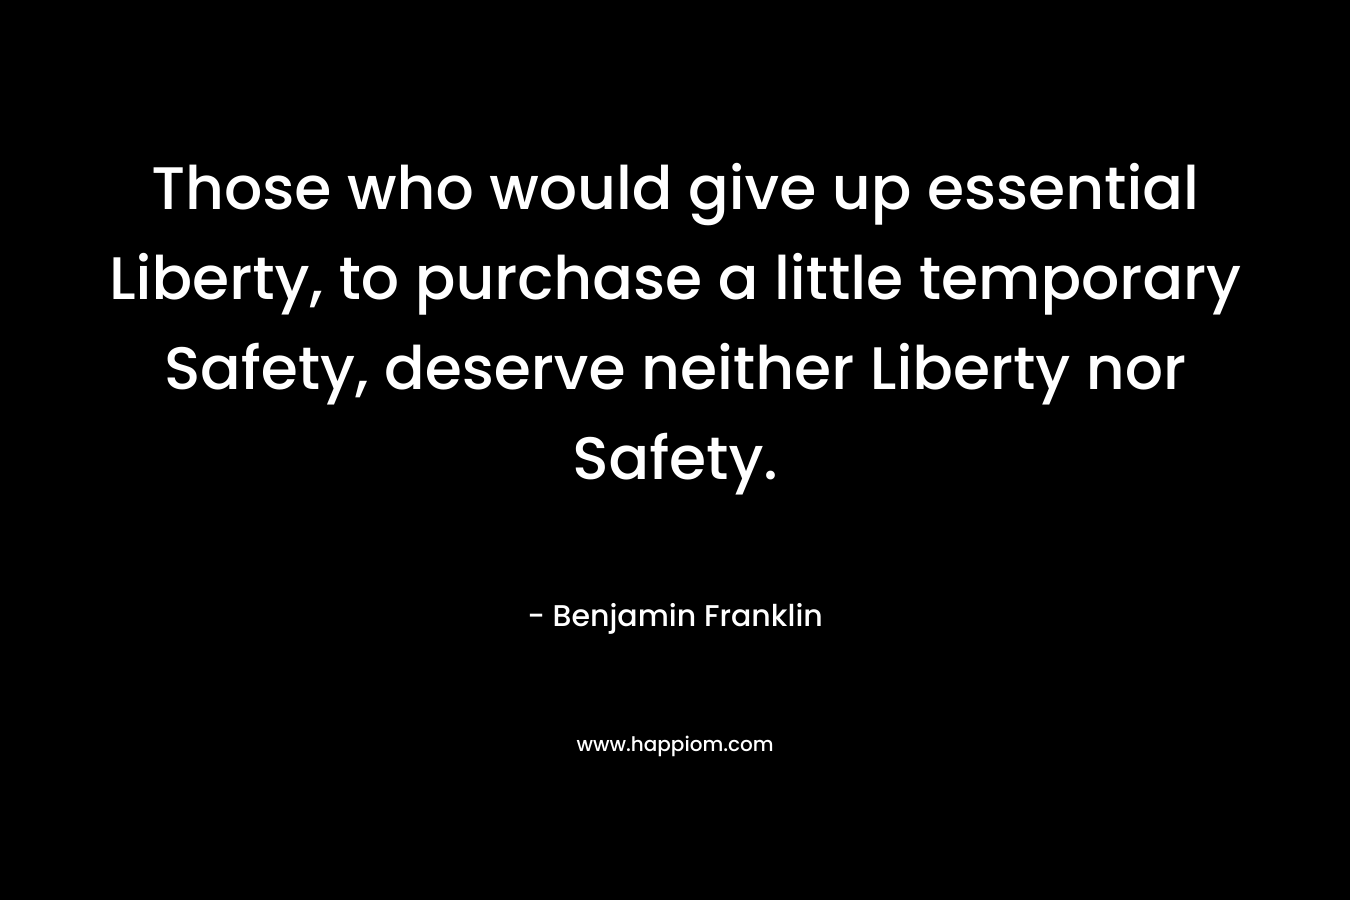 Those who would give up essential Liberty, to purchase a little temporary Safety, deserve neither Liberty nor Safety.